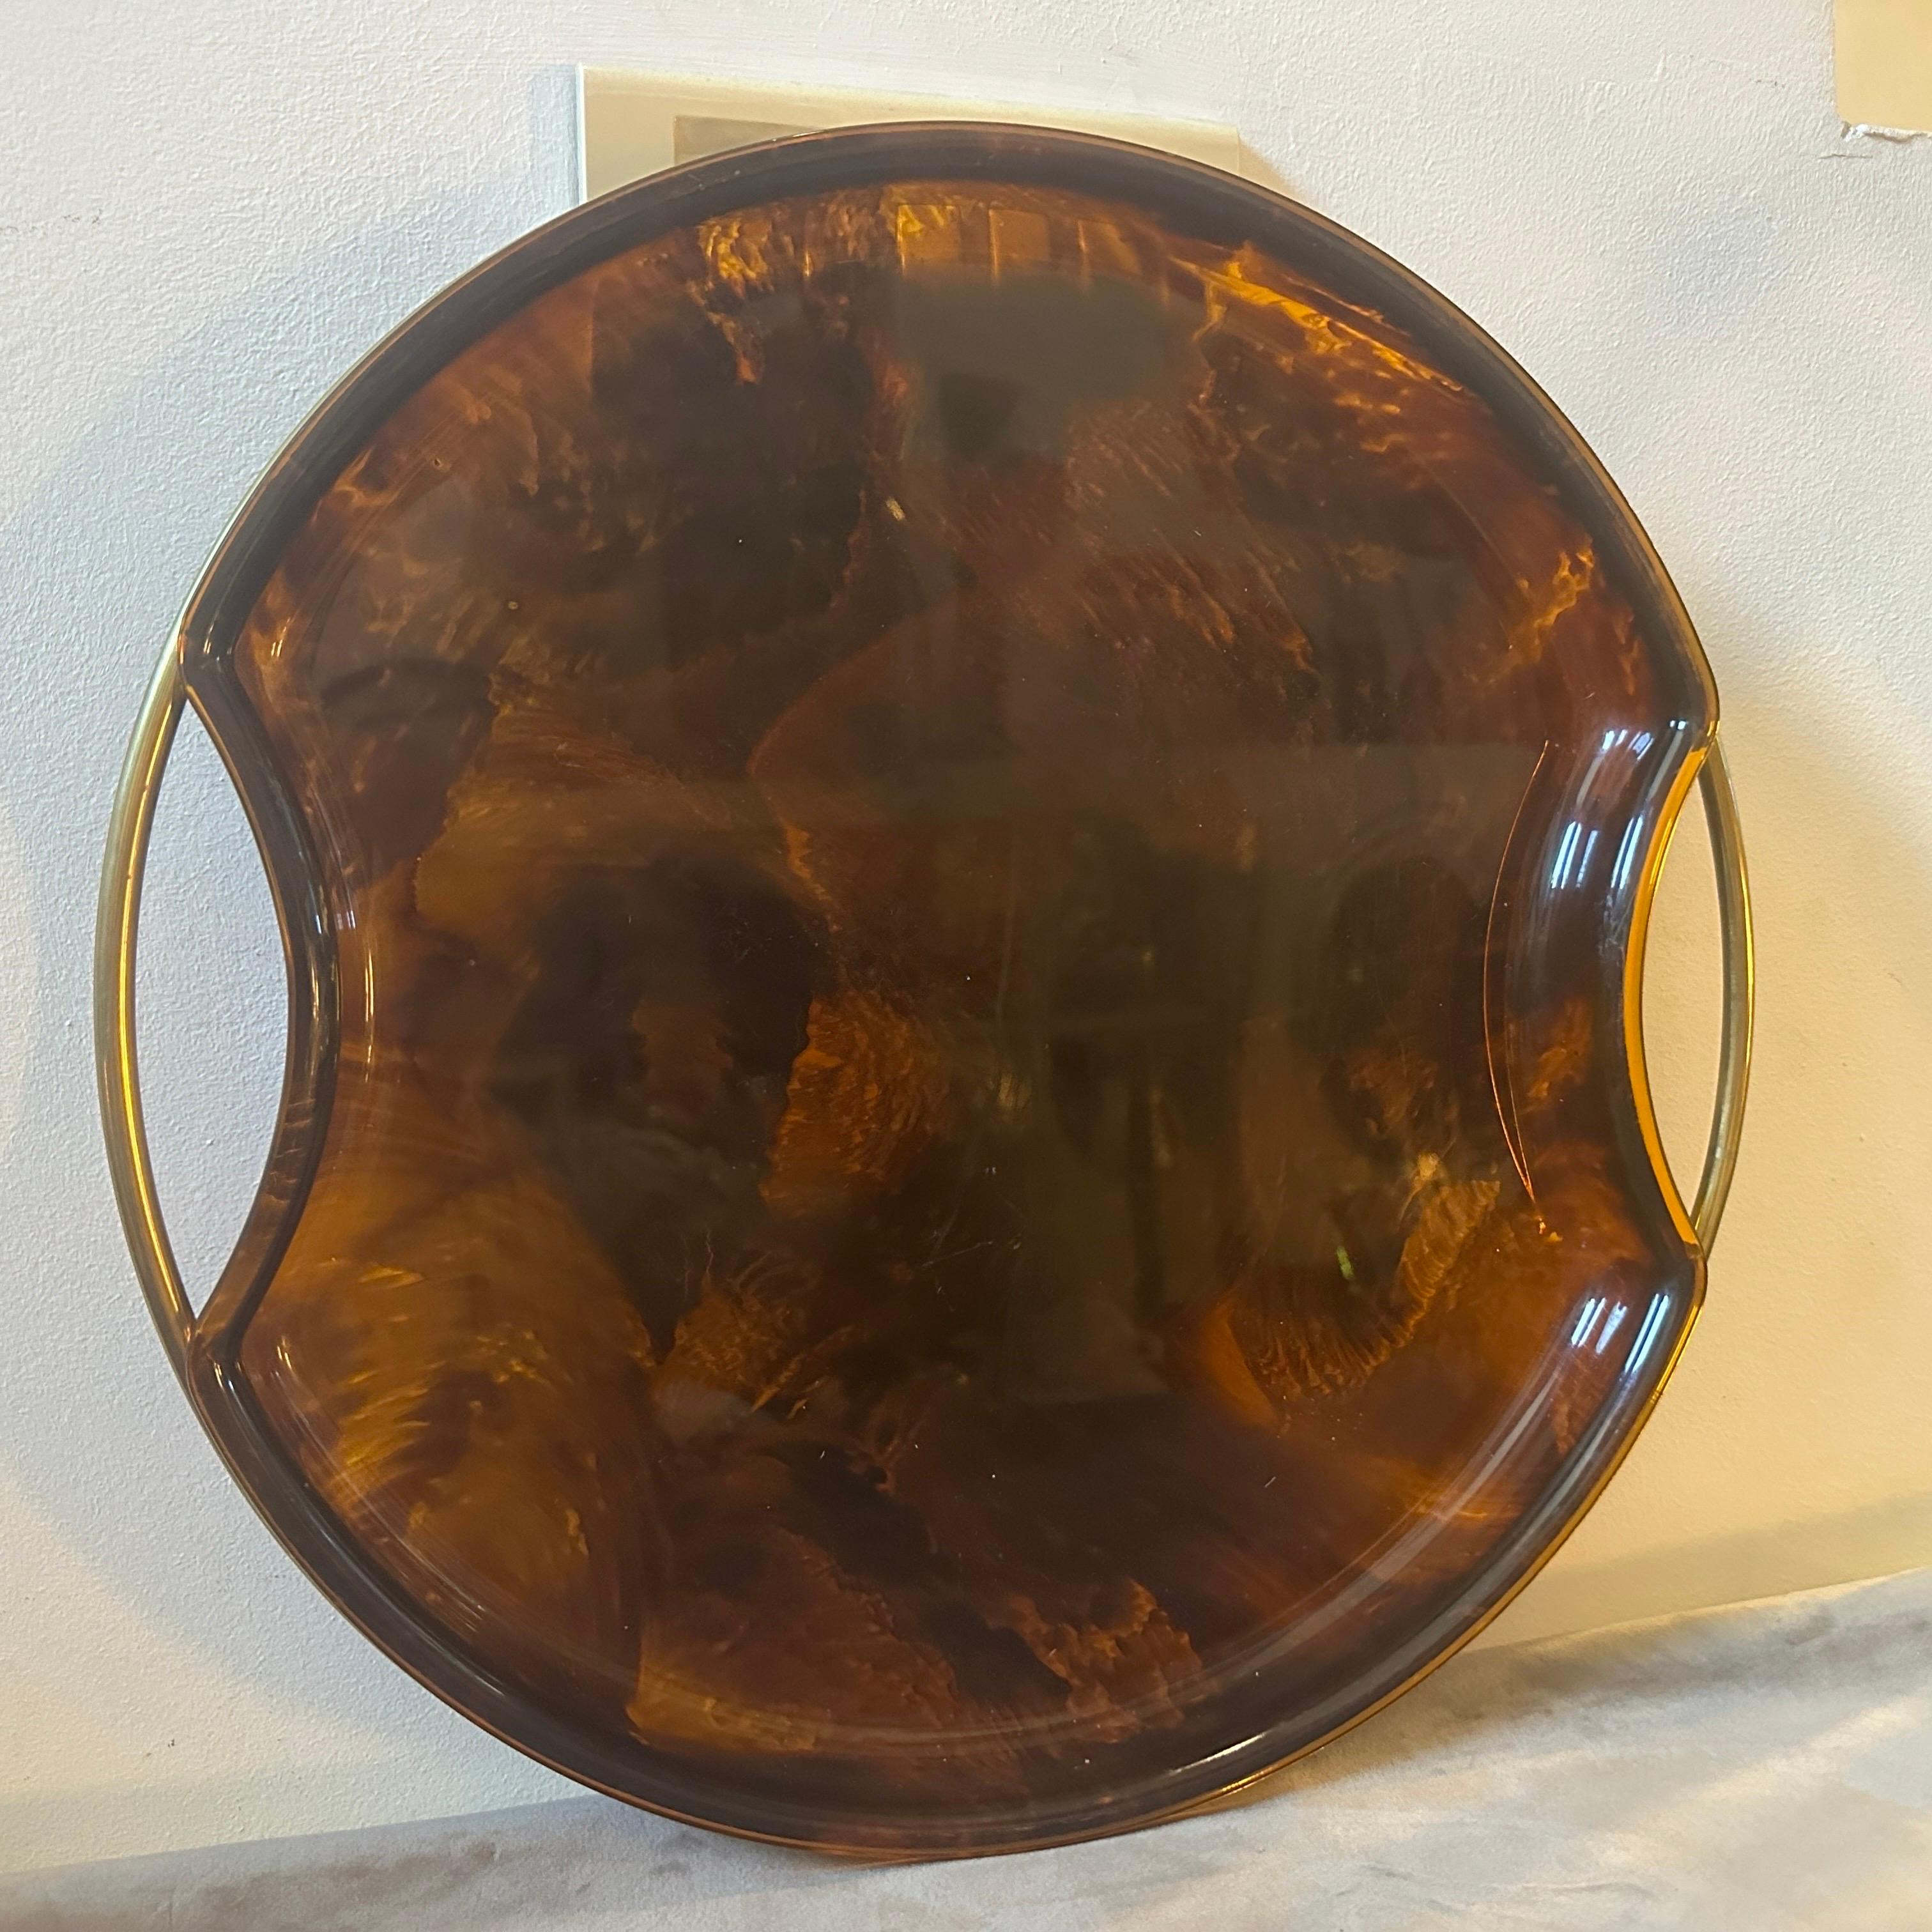 A Modernist Fake Tortoise Lucite and Brass round tray designed and manufactured by the Italian design company Guzzini during the 1970s in lovely conditions. The Guzzini company is a well-known Italian brand that specializes in the production of